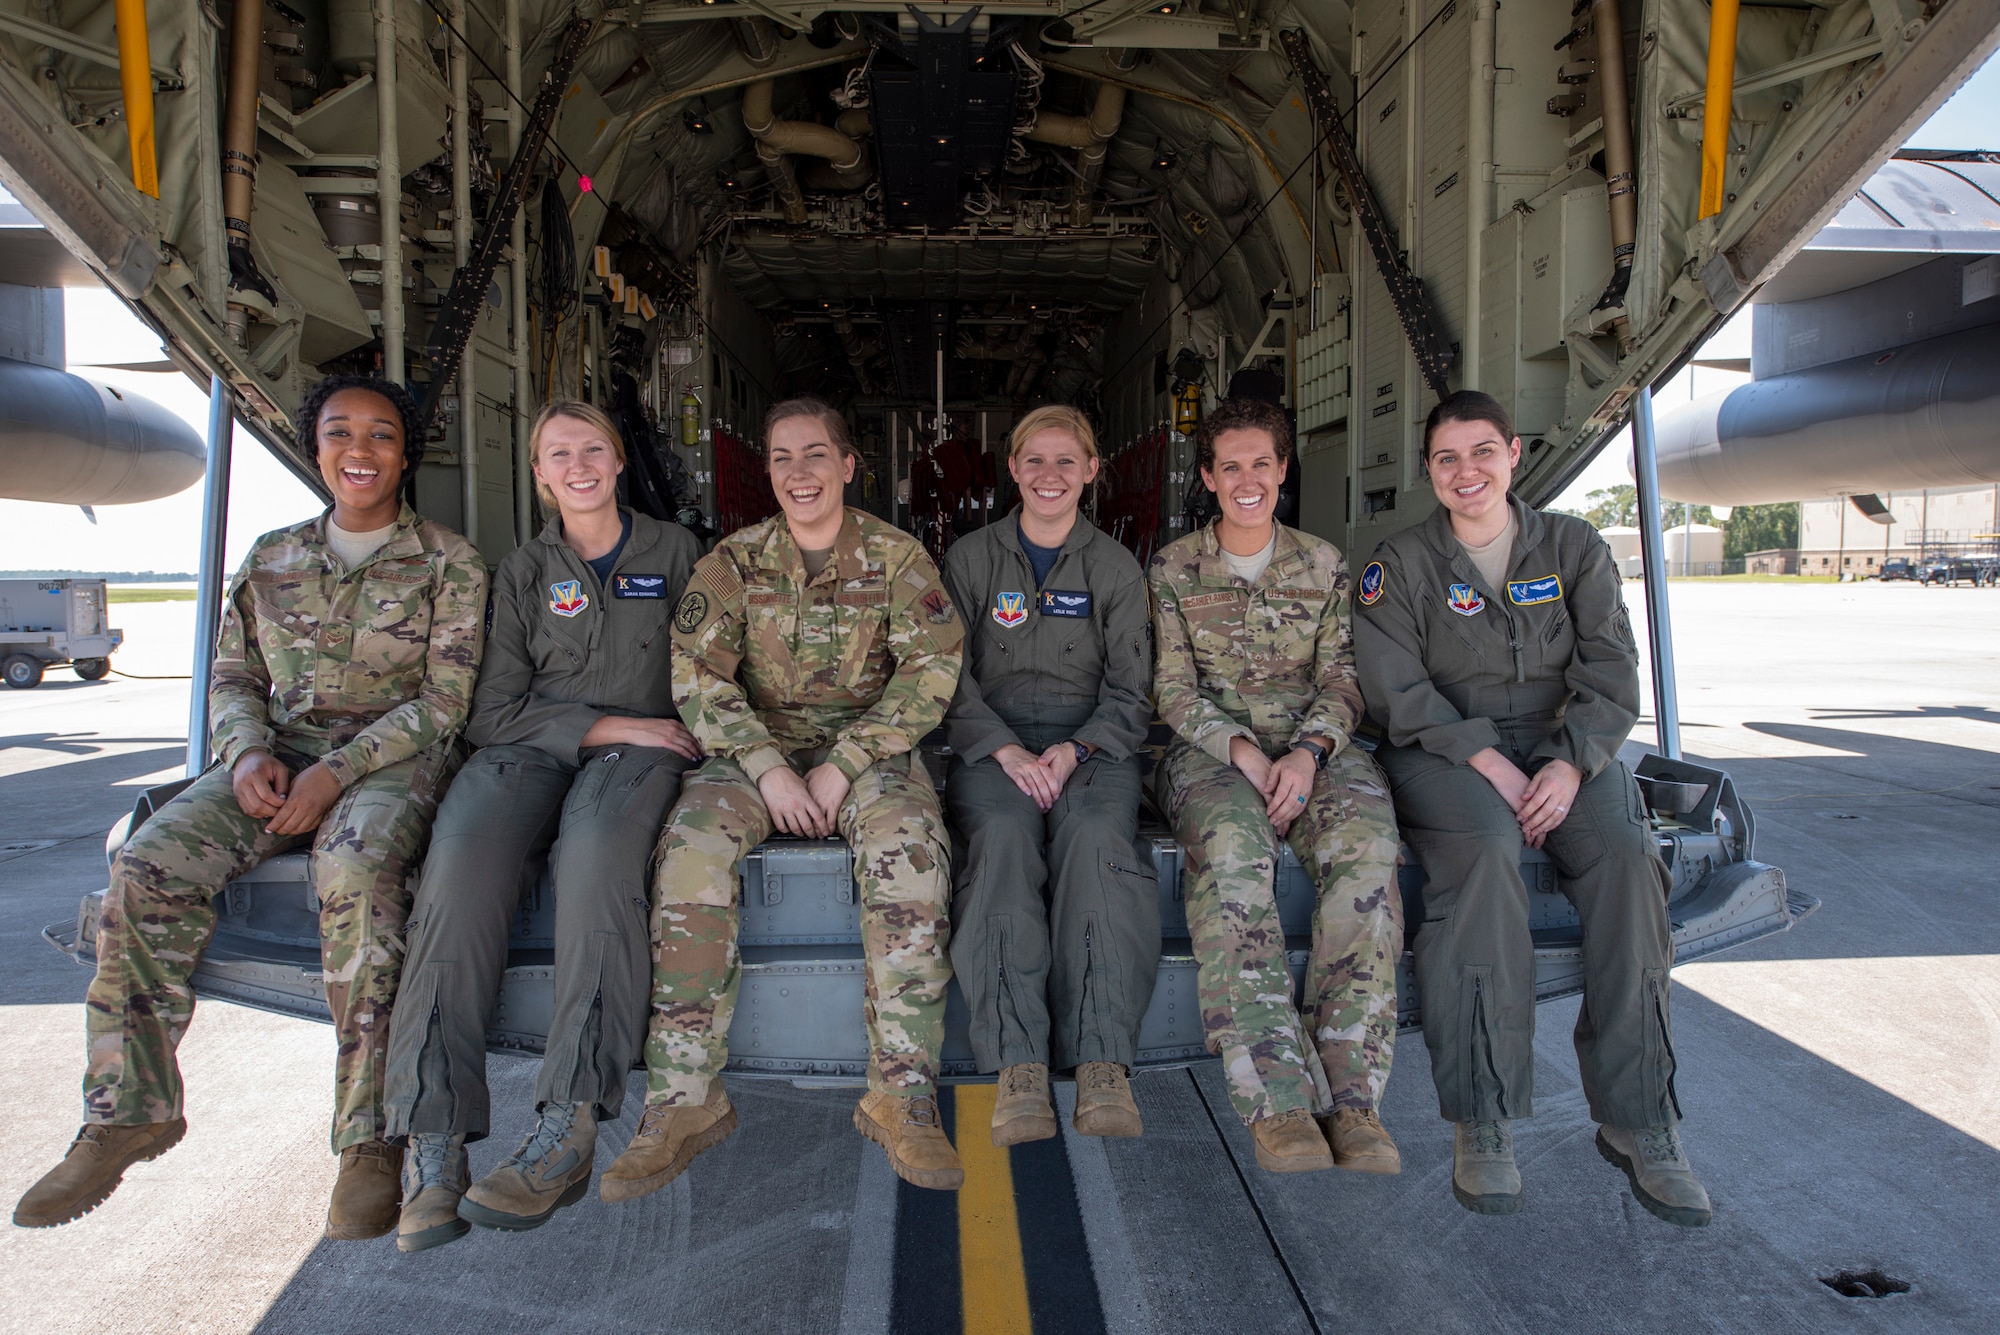 Airmen with the 347th Rescue Group pose for a photo after completing the HC-130J Combat King II’s first flight to be operated by an all-female aircrew Sept. 6, 2019, at Moody Air Force Base, Ga. From left to right: Airman 1st Class Jazmyne Lomax, Capt. Sarah Edwards, Senior Airman Rachel Bissonnette, Capt. Leslie Weisz, Tech. Sgt. Colleen McGahuey-Ramsey, and Capt. Jordan Barden. (U.S. Air Force photo by 2nd Lt. Kaylin P. Hankerson